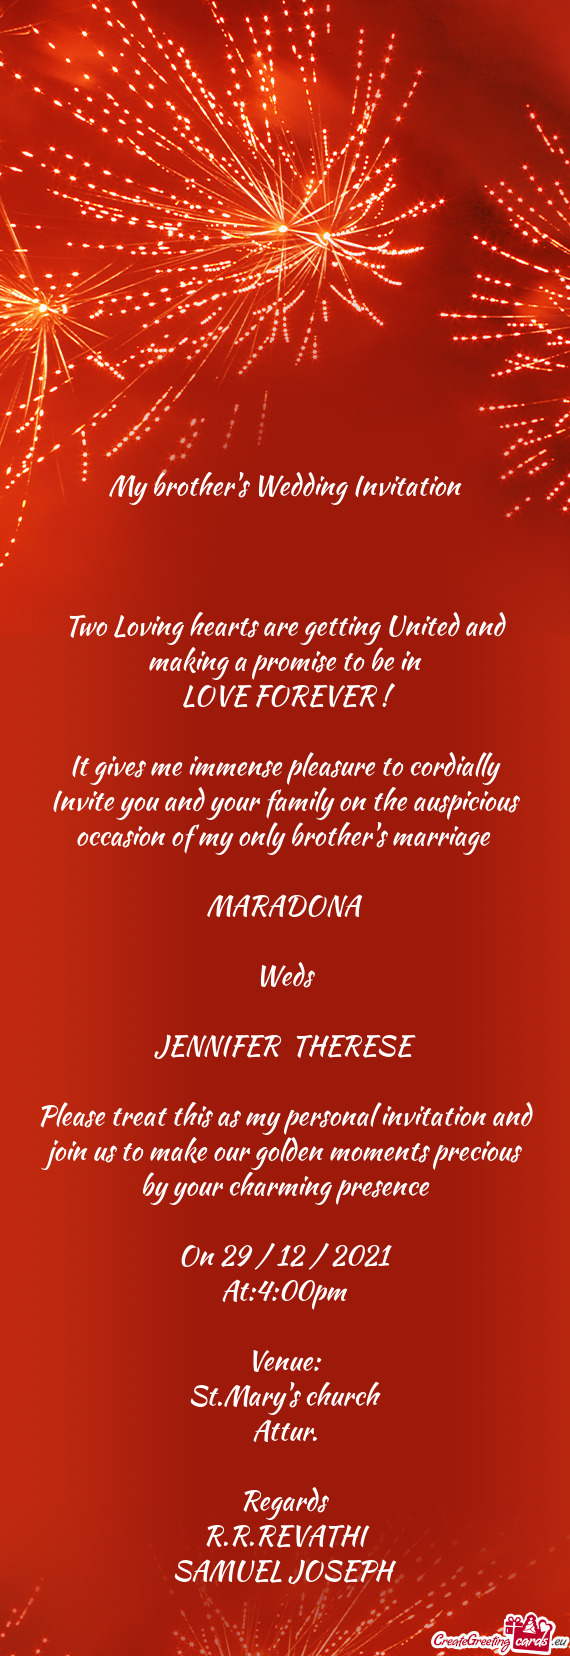 Be in
 LOVE FOREVER ! 
 
 It gives me immense pleasure to cordially Invite you and your family on t